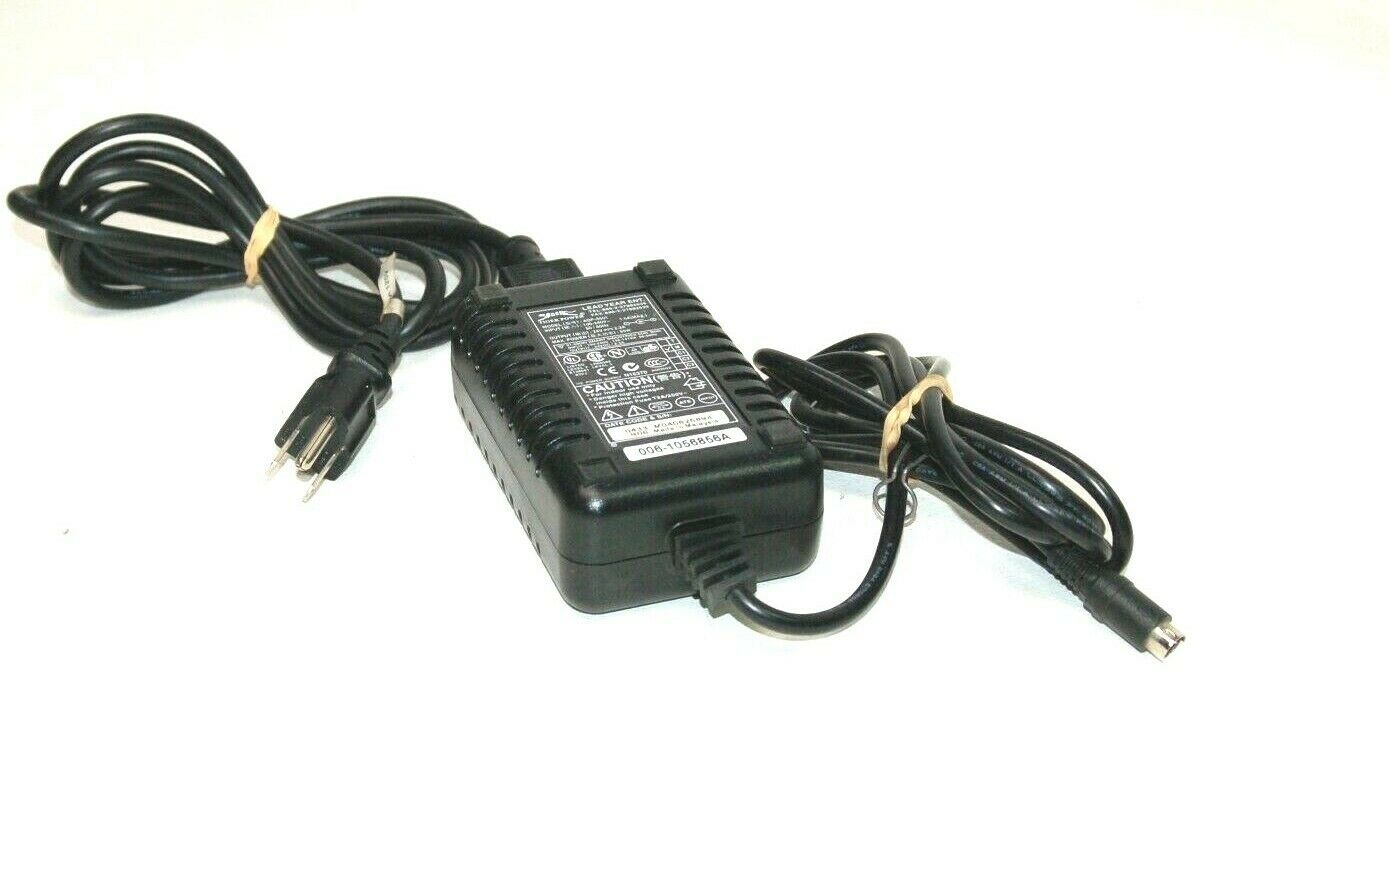 Genuine Tiger Power NCR 24V 2.3A 55W 3-PIN AC Adapter Power Supply ADP-5501 Compatible Brand: Tiger POwer Maximum Out